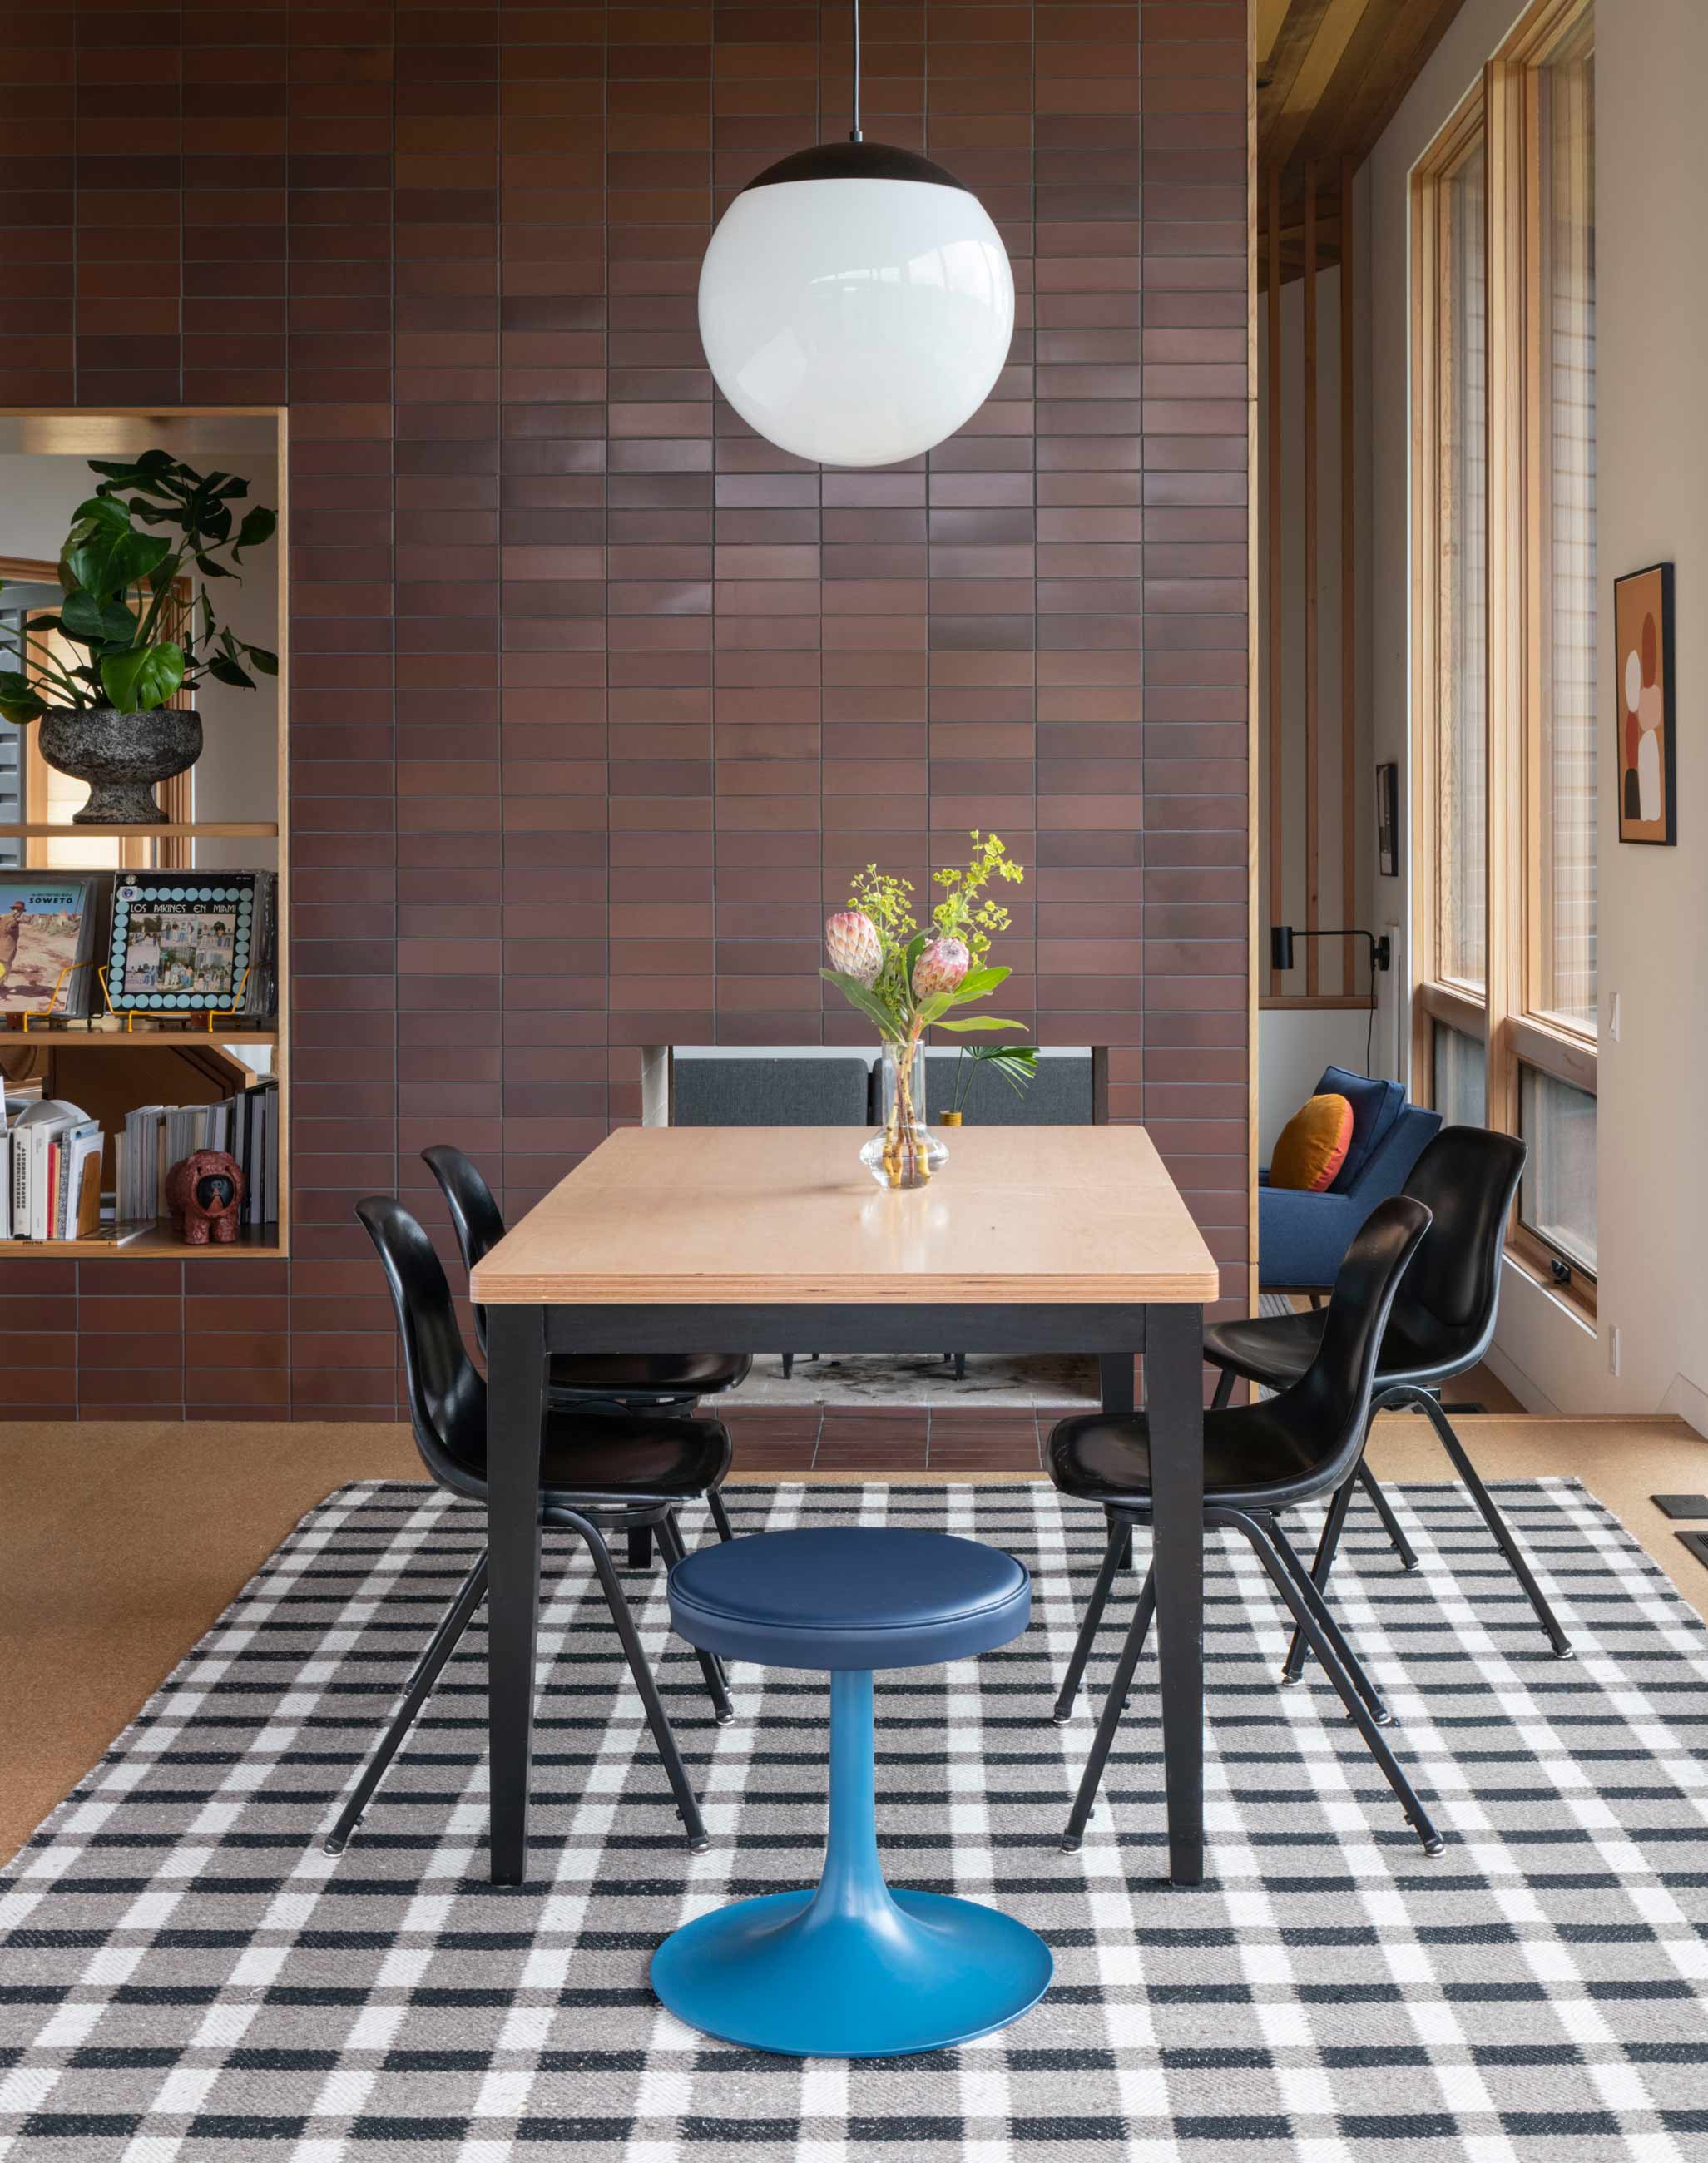 Modern dining room with wooden table, classroom chairs, and blue stool.